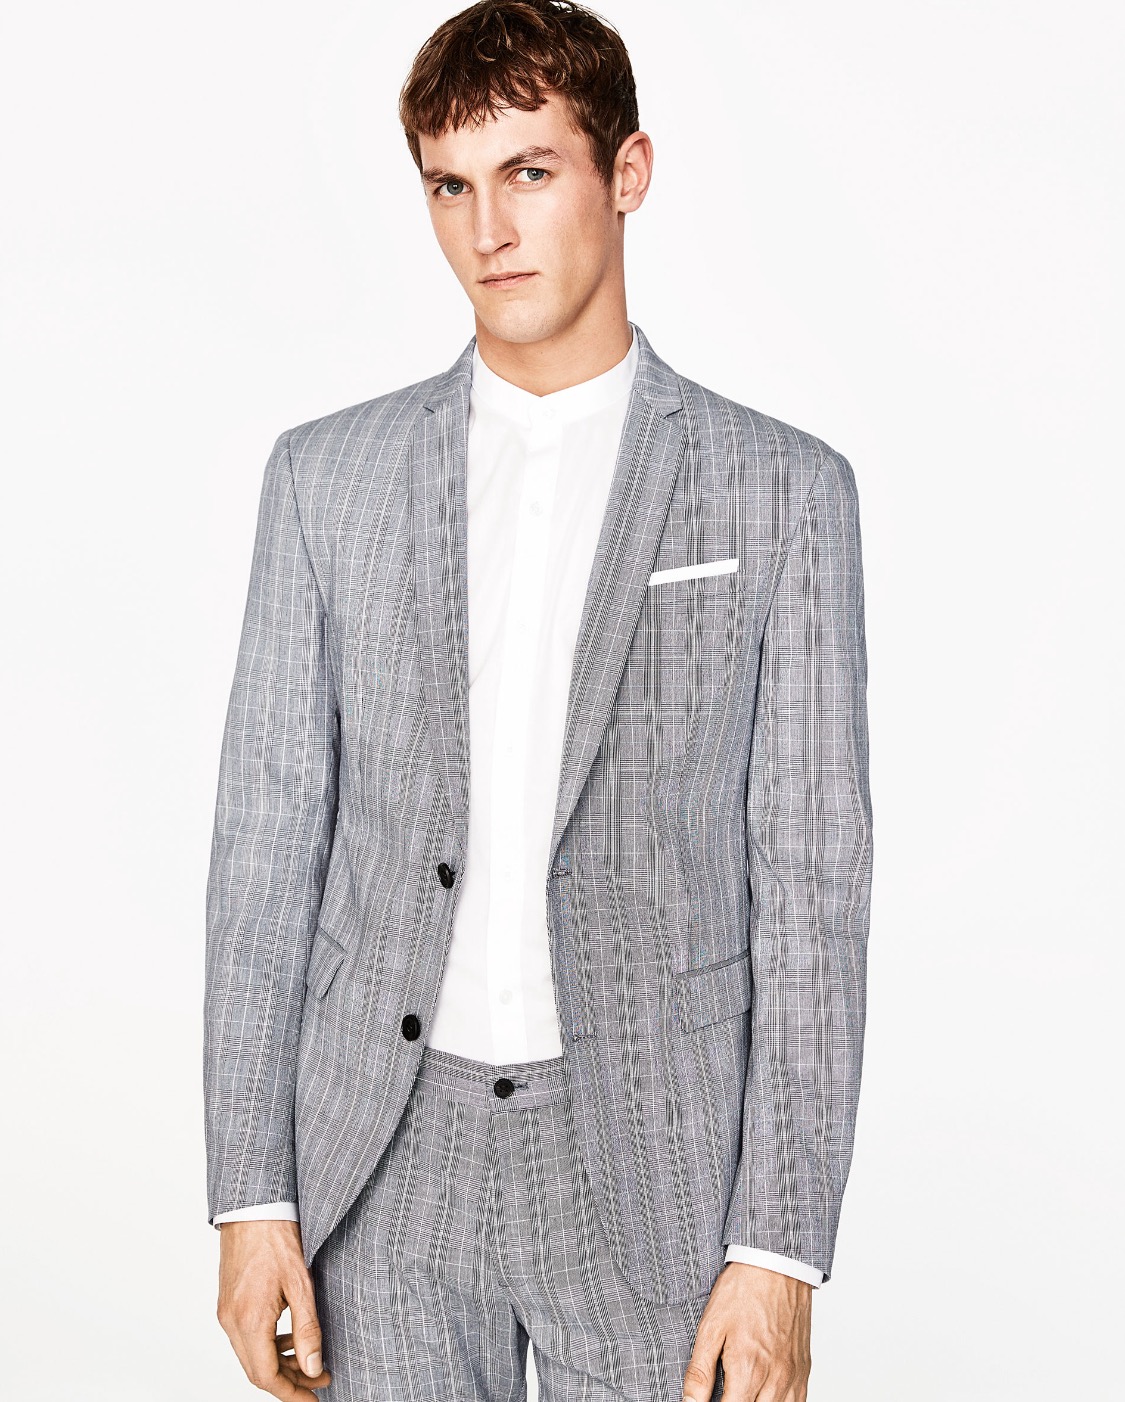 Grey Checked Suit - SUIT ADDICT